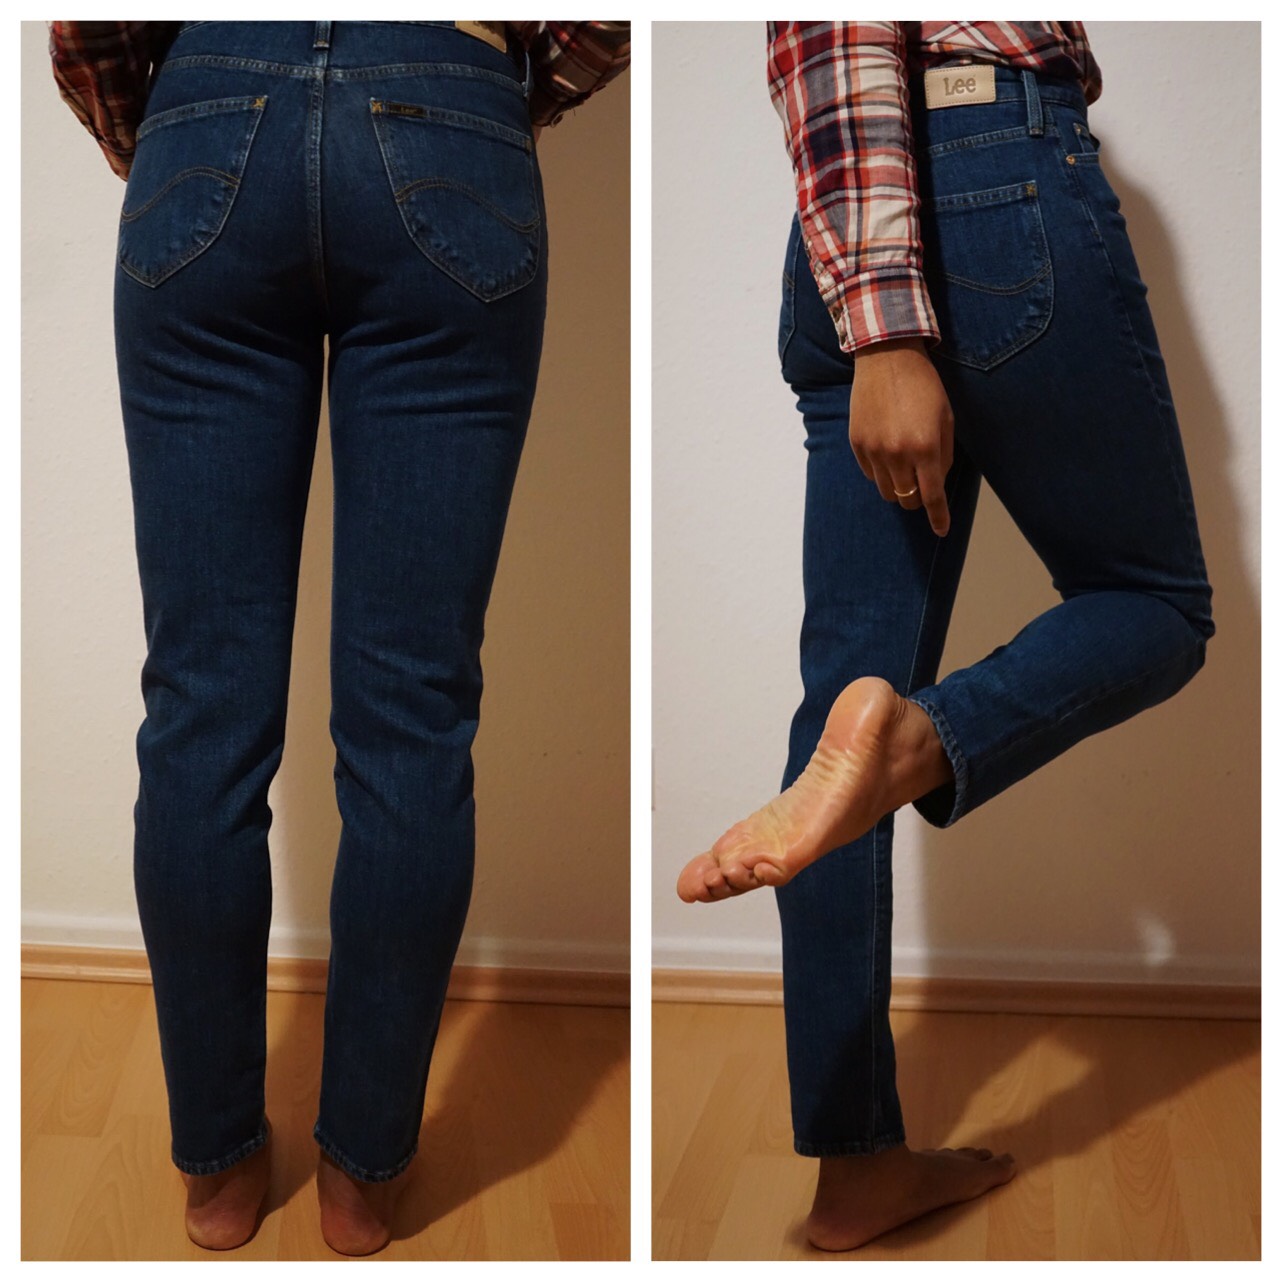 size 16 jeans in inches